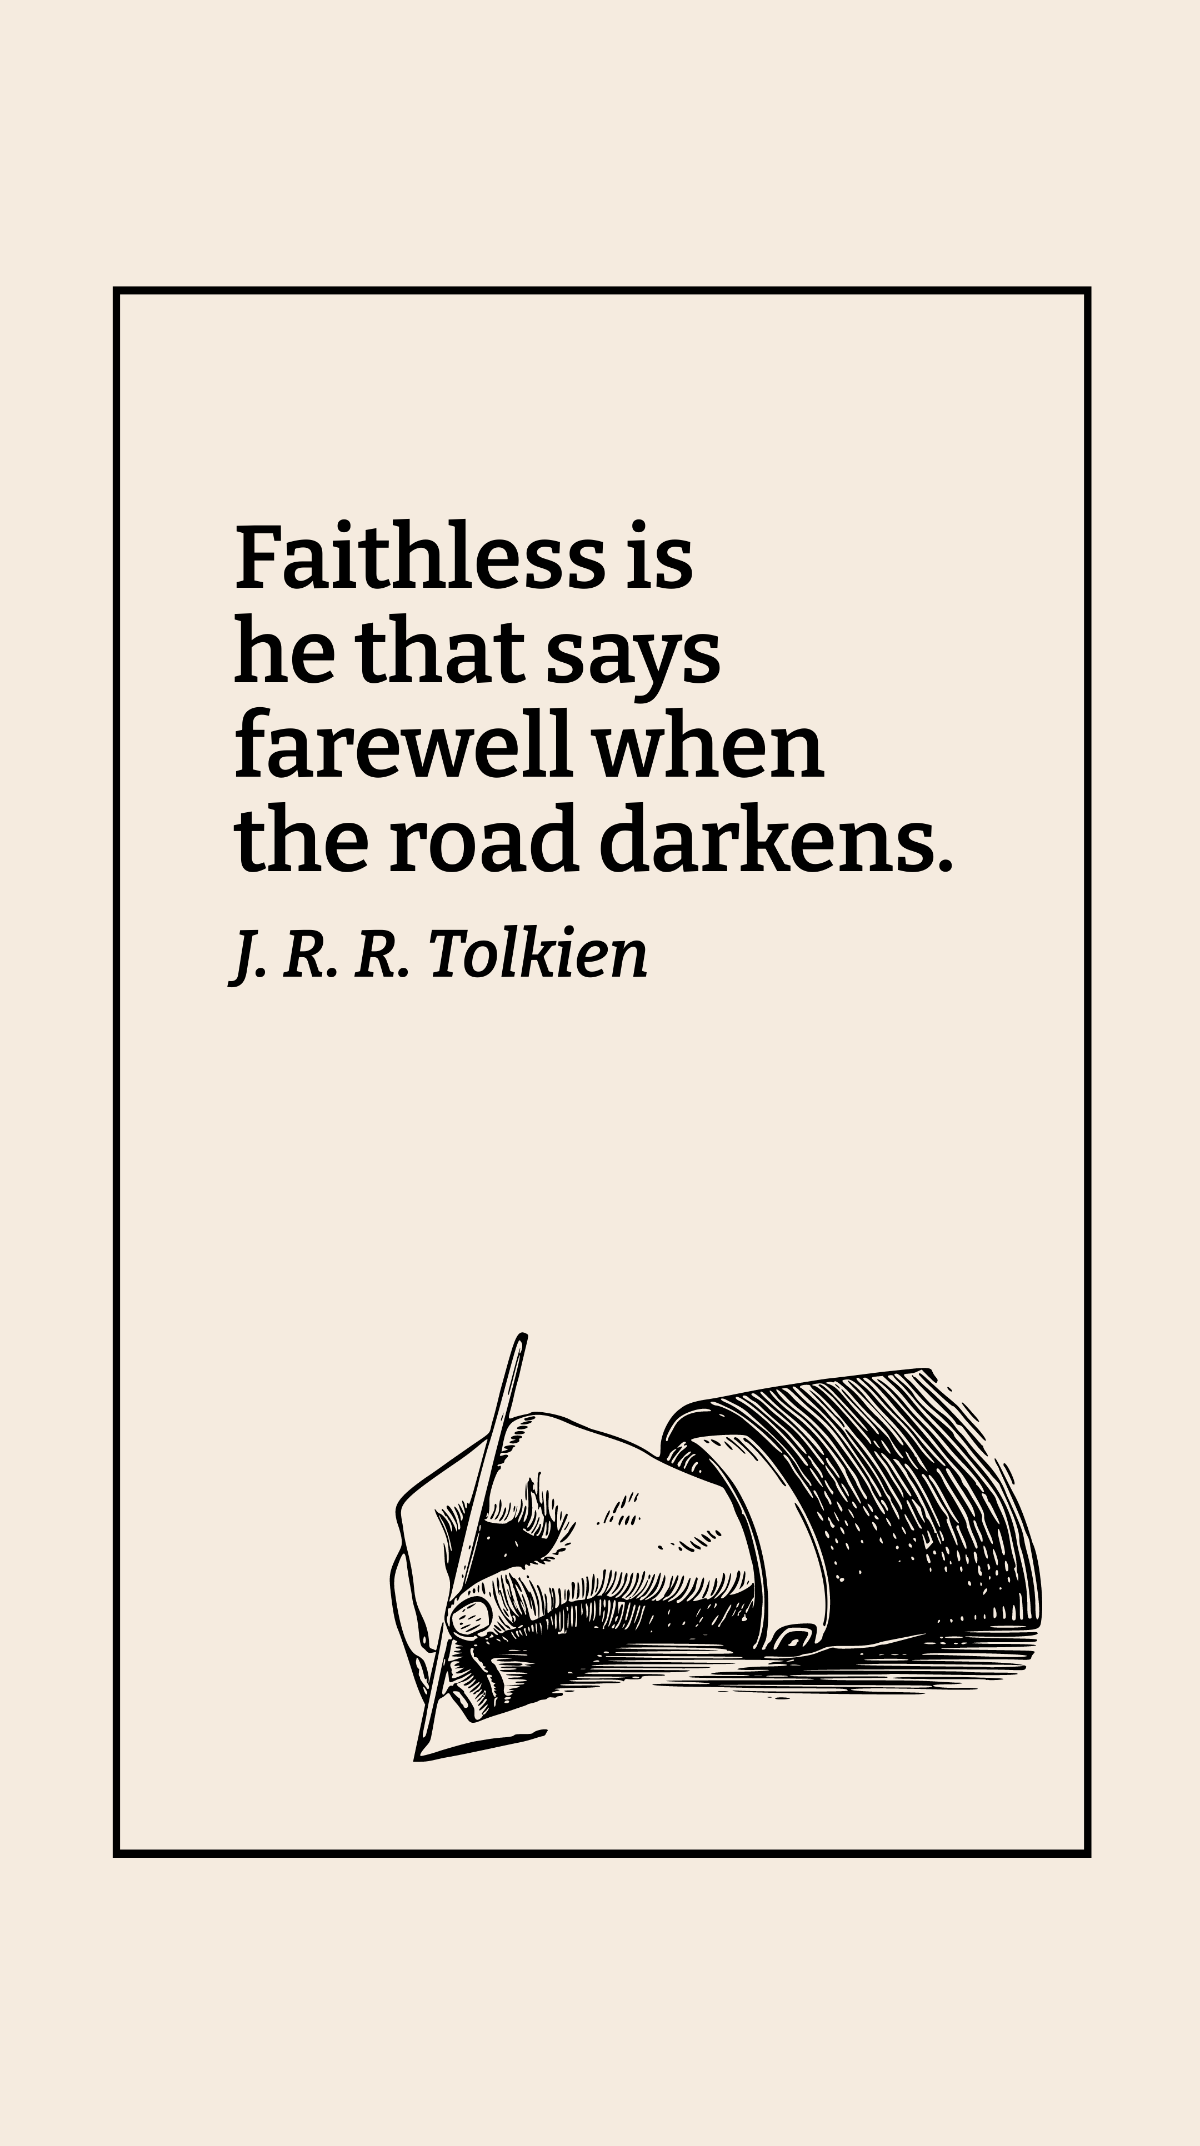 J. R. R. Tolkien - Faithless is he that says farewell when the road darkens.